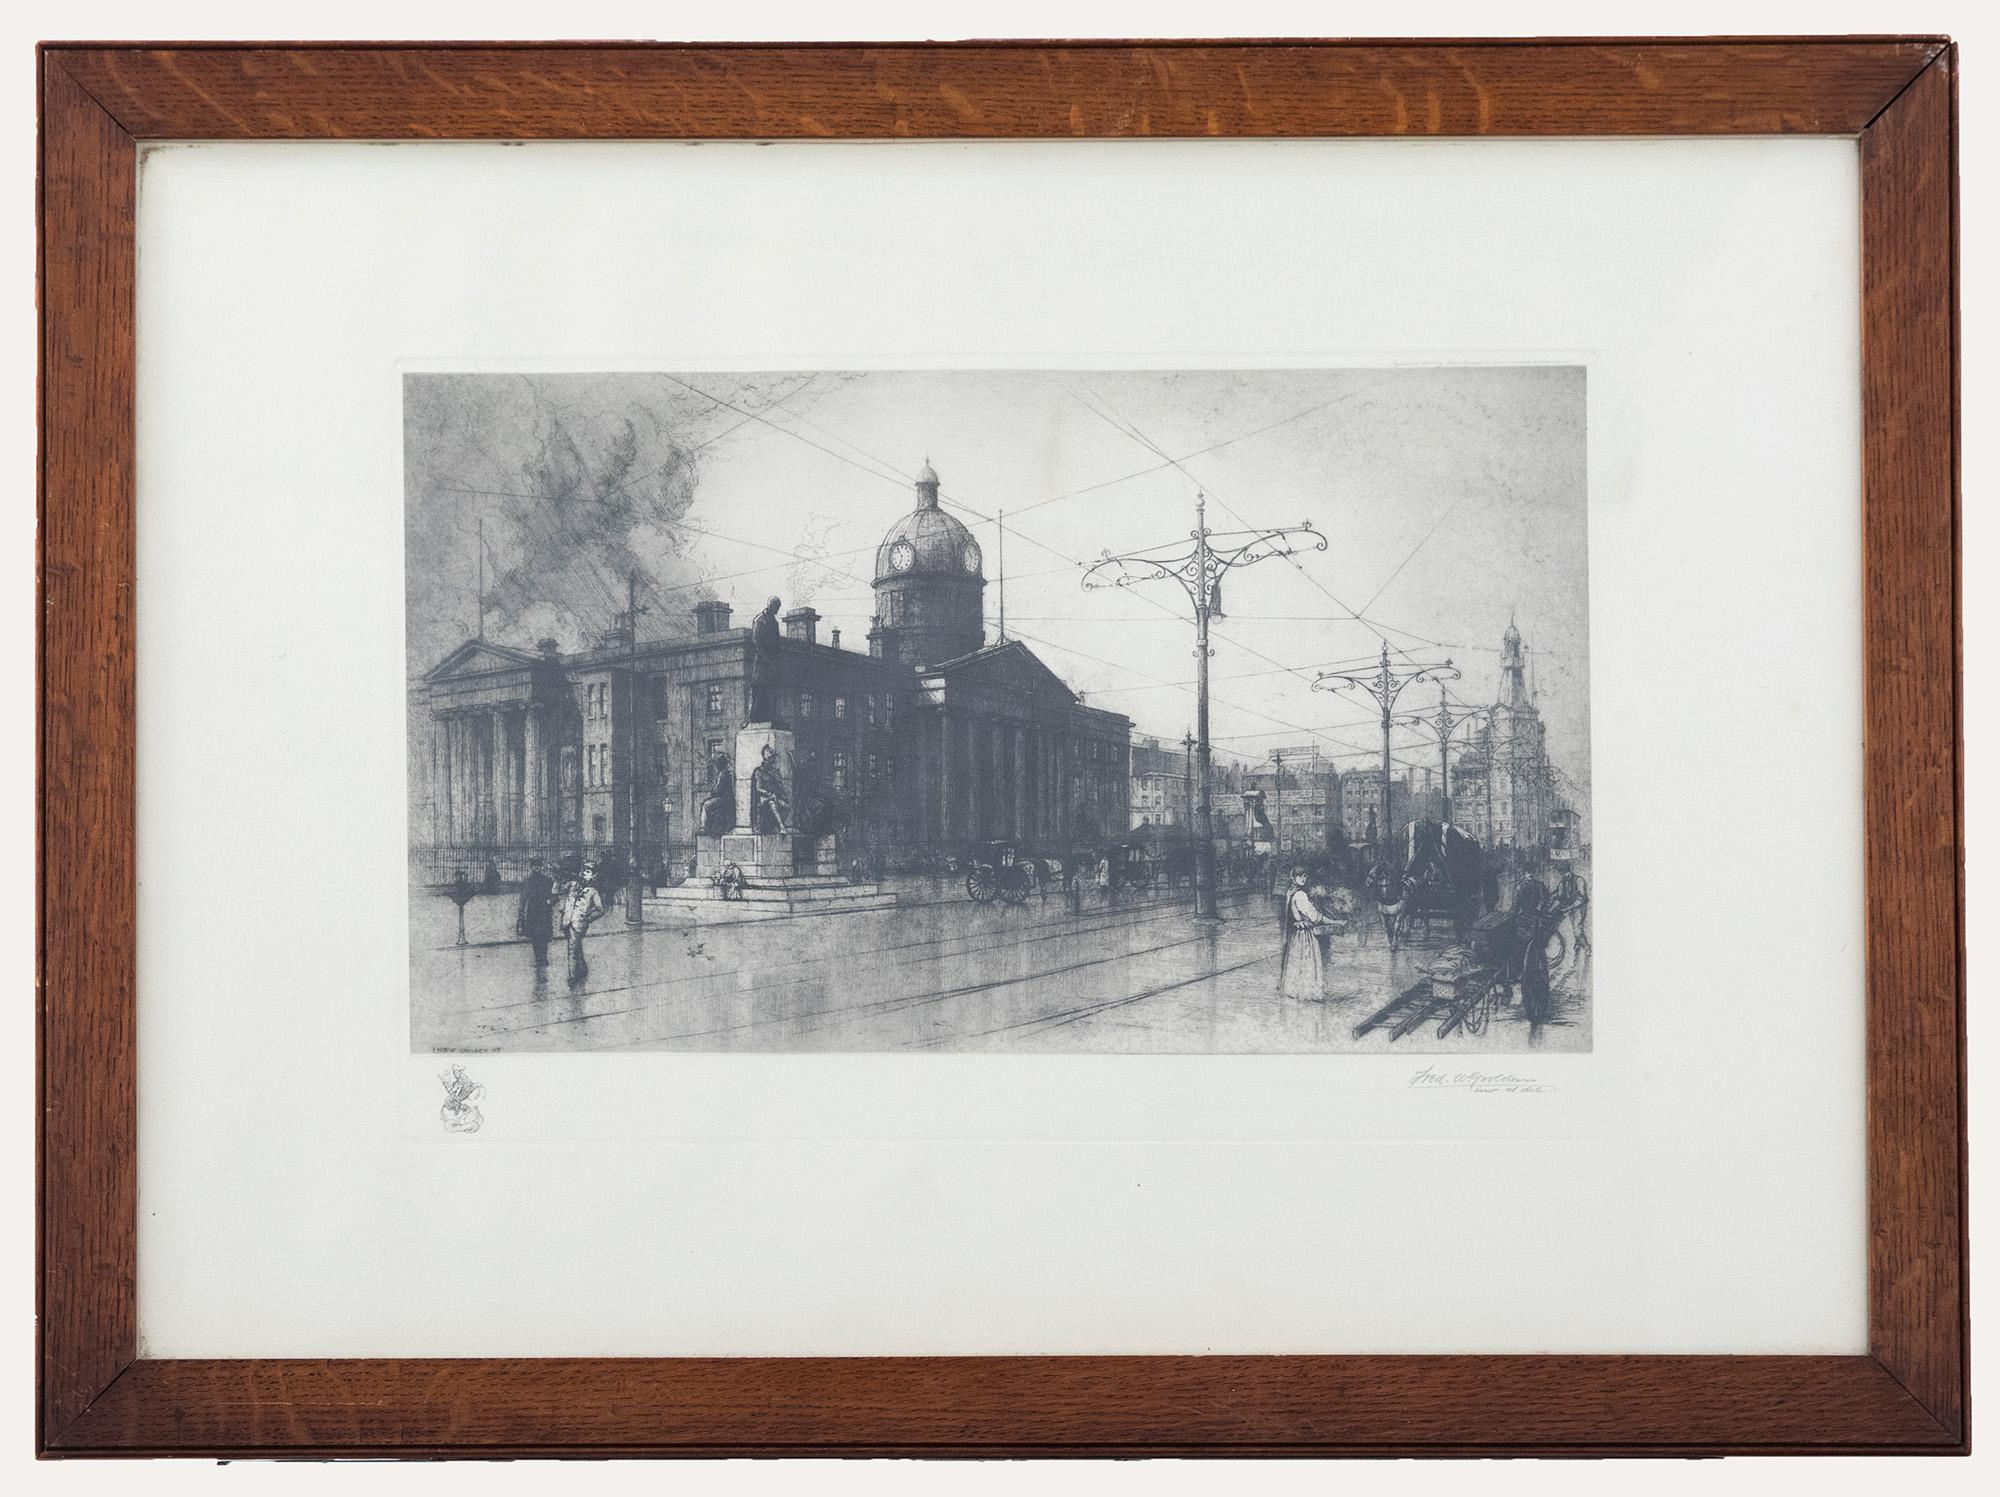 Unknown Landscape Print - Fred W Goolden (fl.1908-1918) - Framed Etching, The Old Royal Infirmary